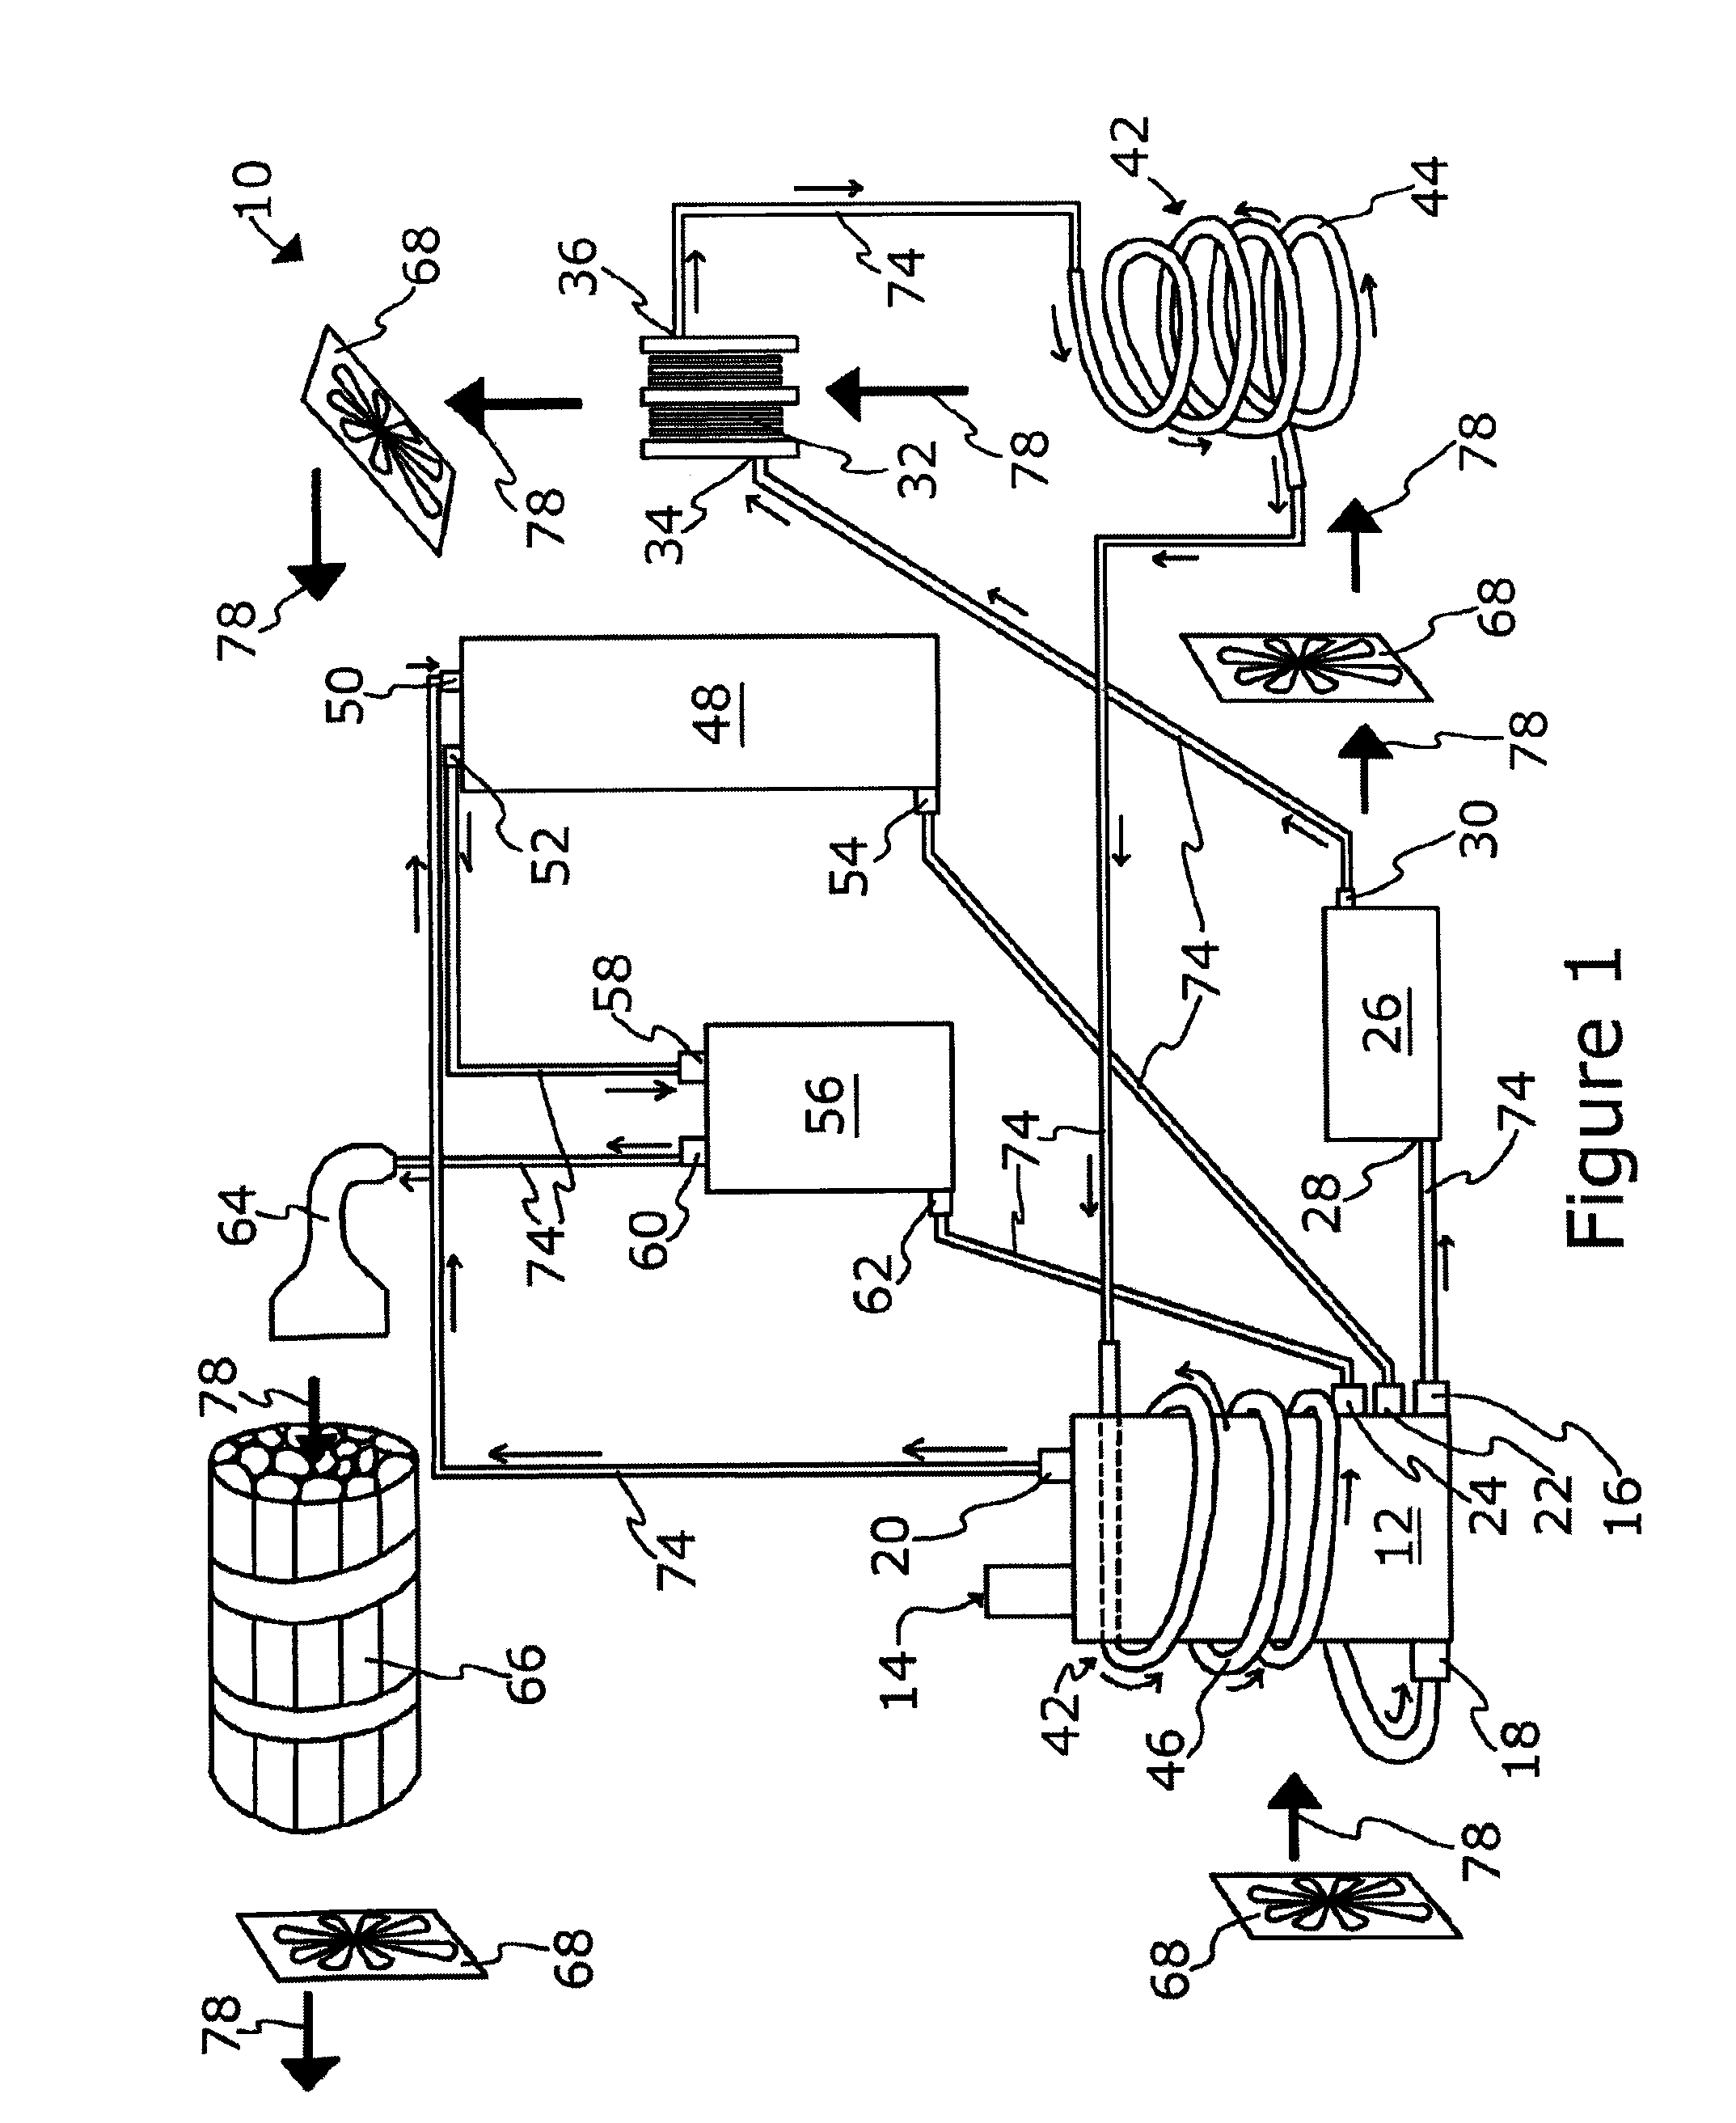 Home heating system utilizing electrolysis of water